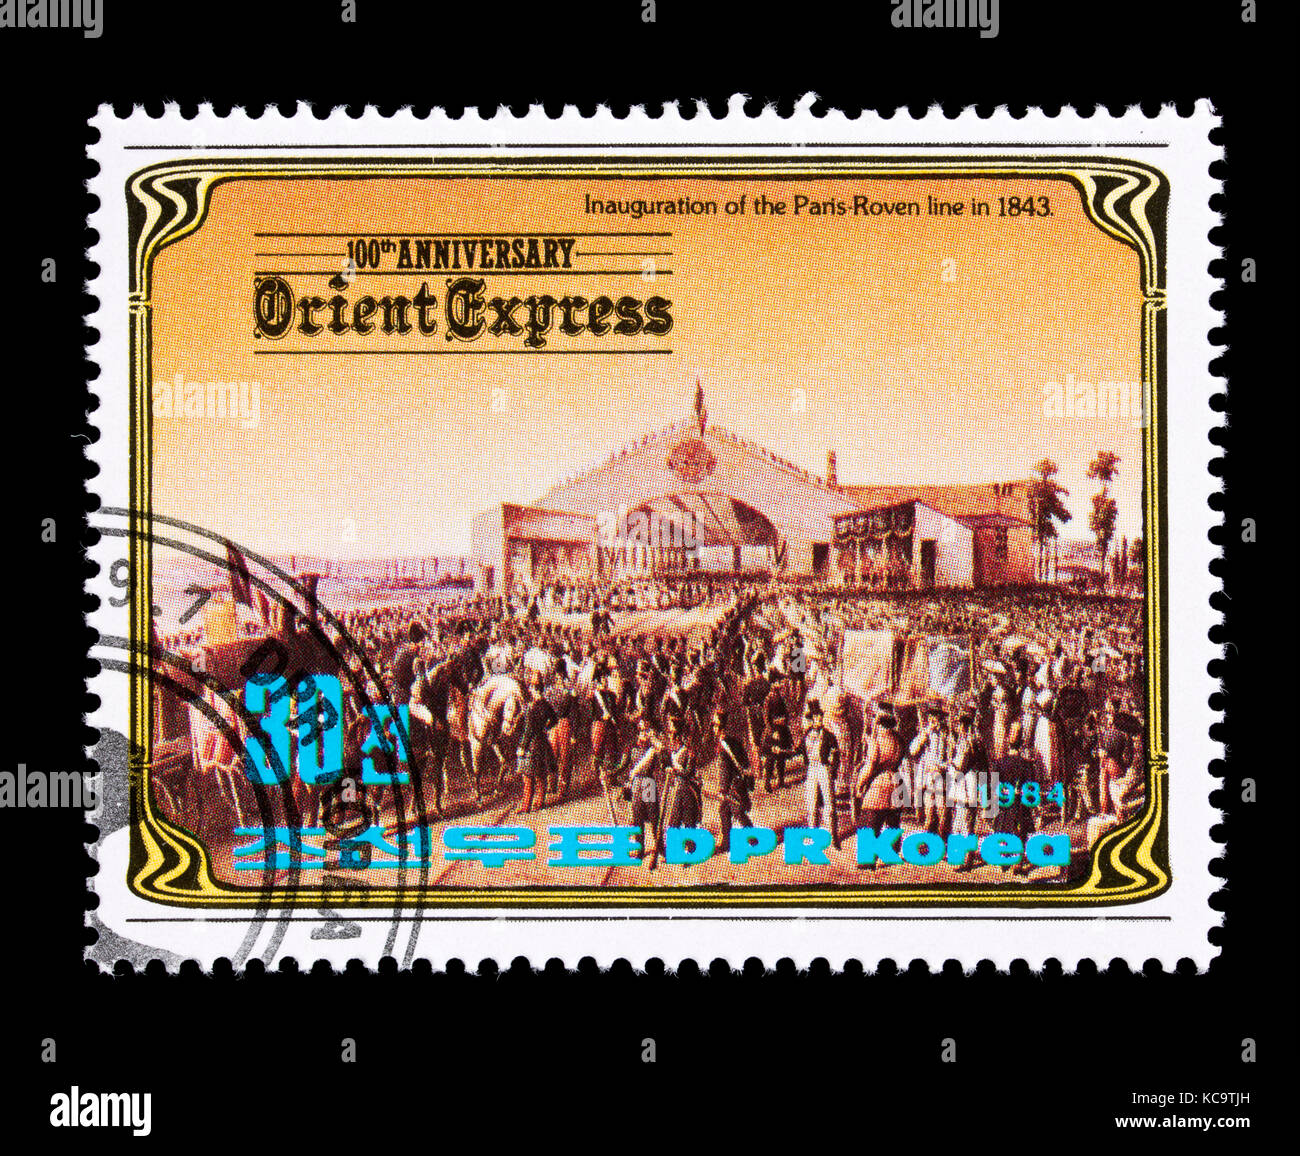 Postage stamp from North Korea, issued for the centennial of the Orient Express, opening of the Paris-Rouen line, 1843 Stock Photo